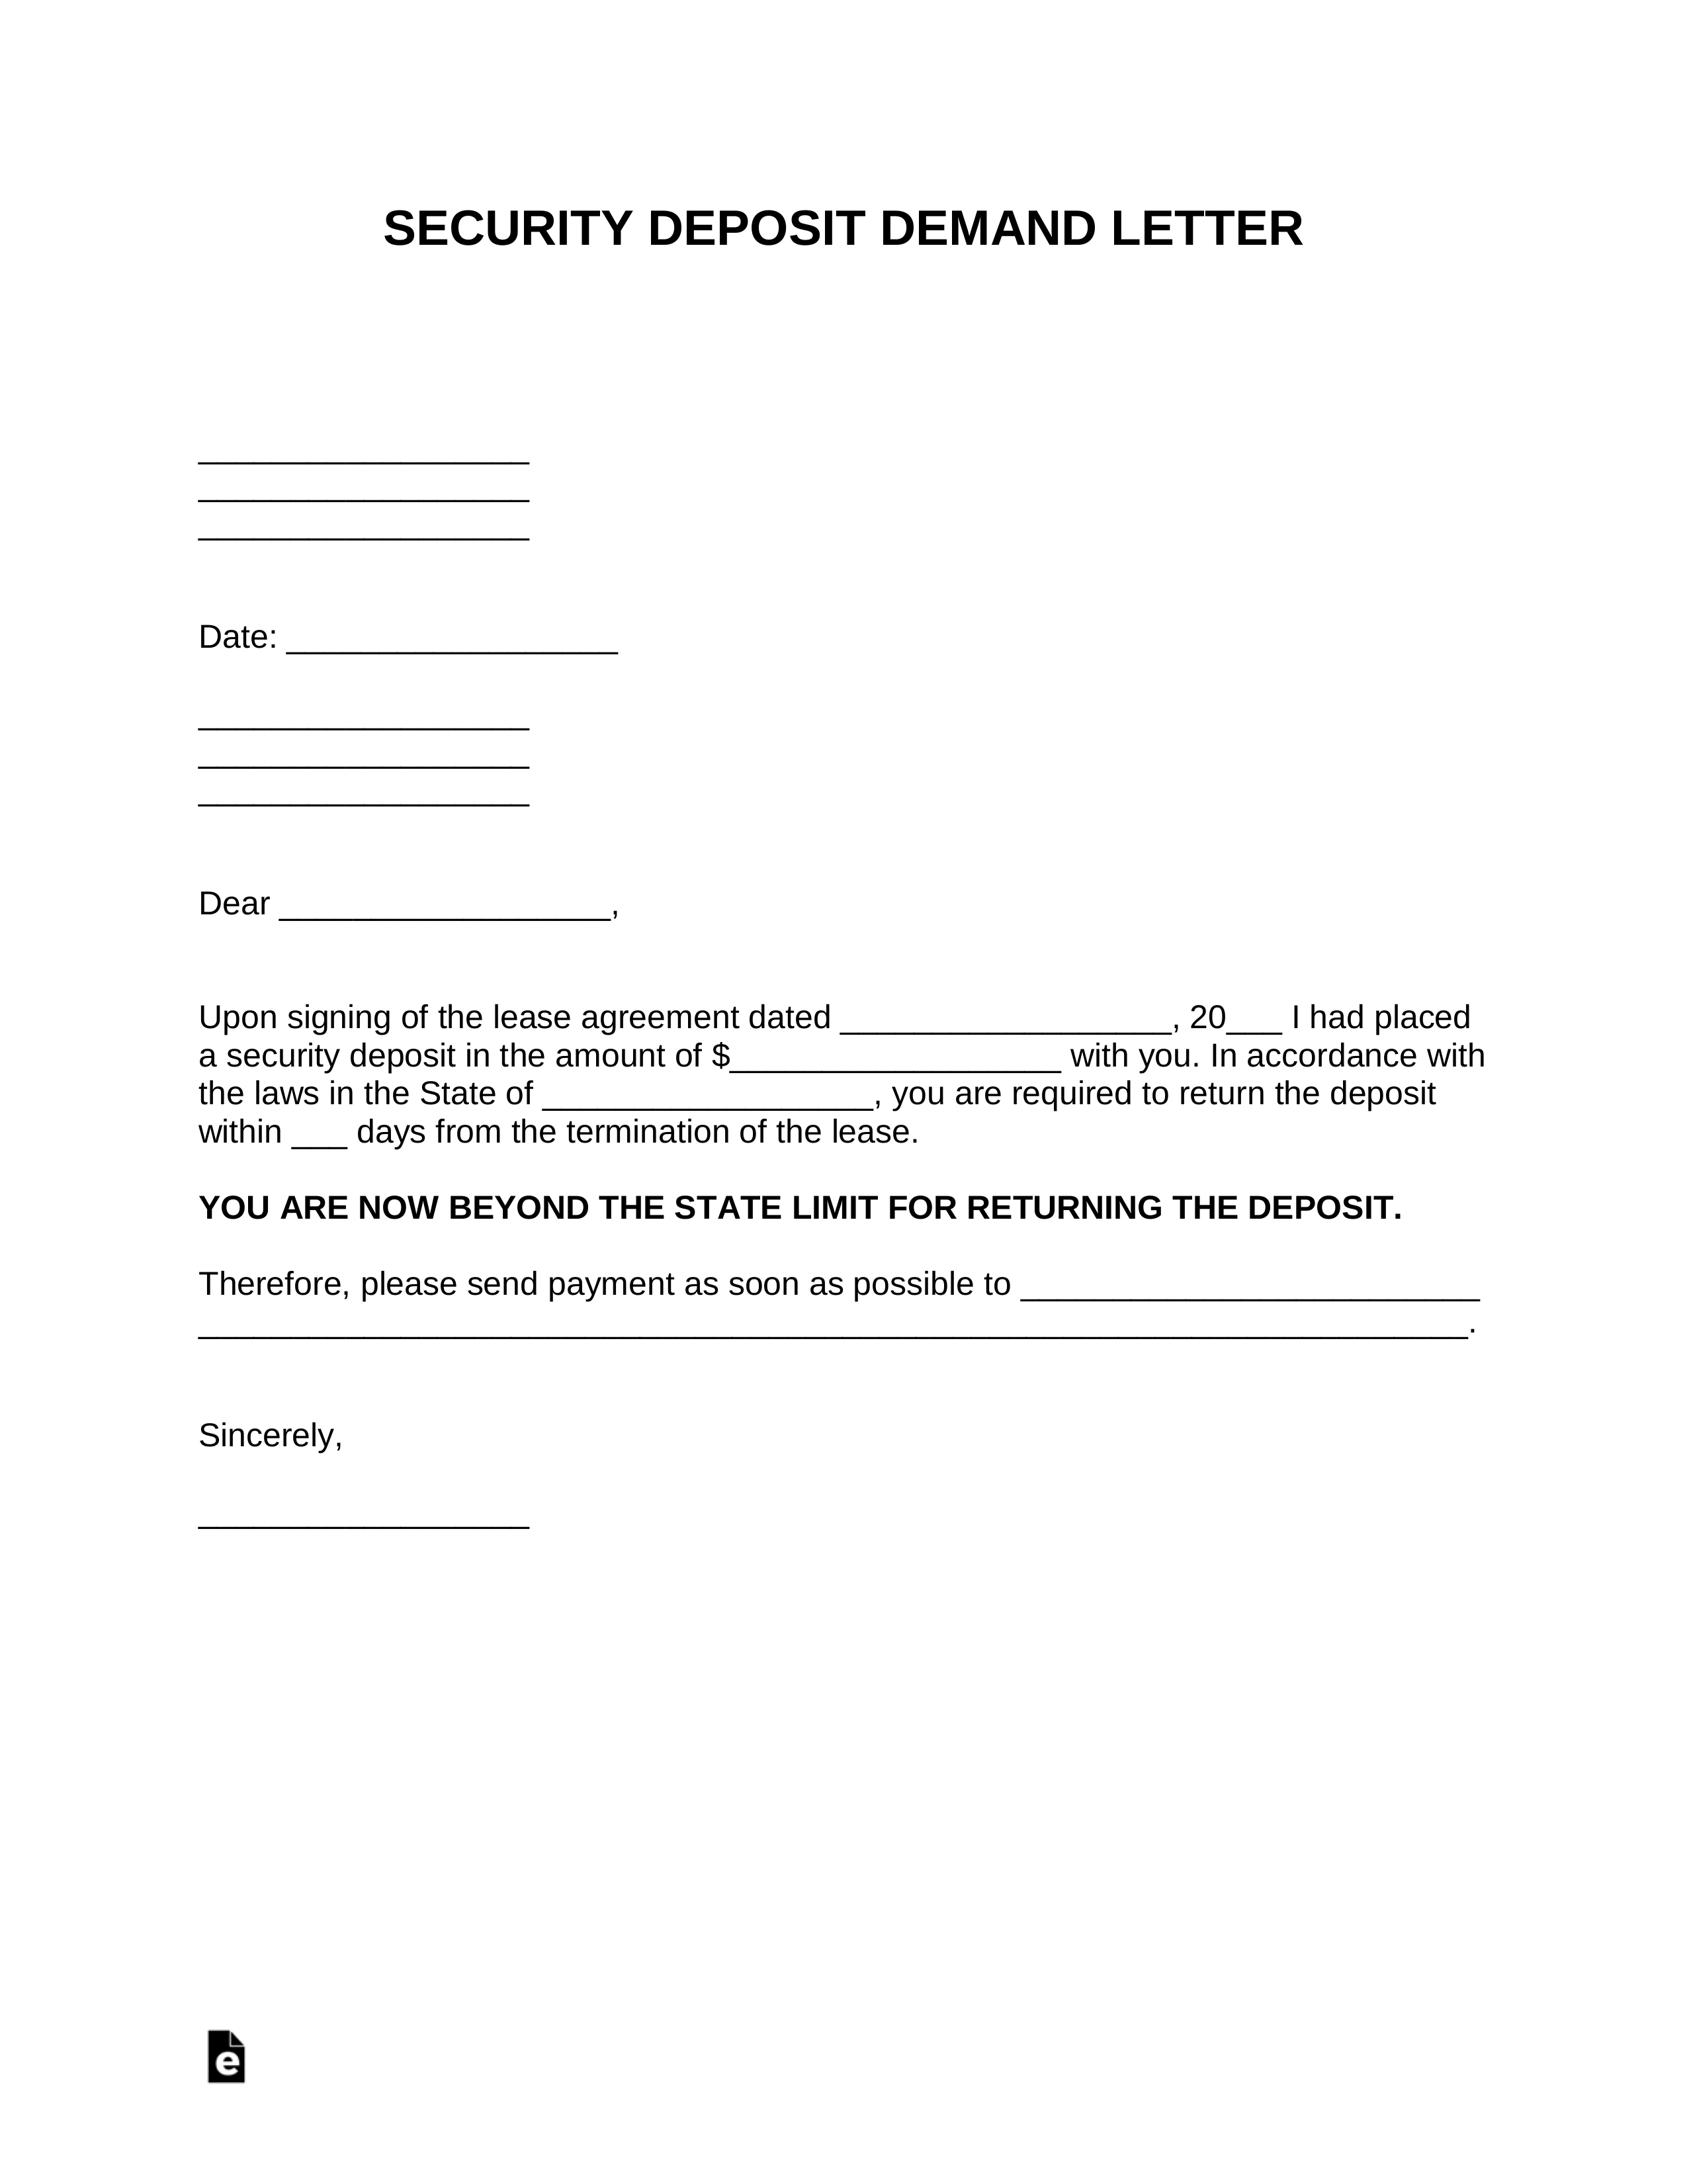 Free Security Deposit Demand Letter Template - PDF  Word – eForms With Regard To Return Of Security Deposit Form Letter For Return Of Security Deposit Form Letter